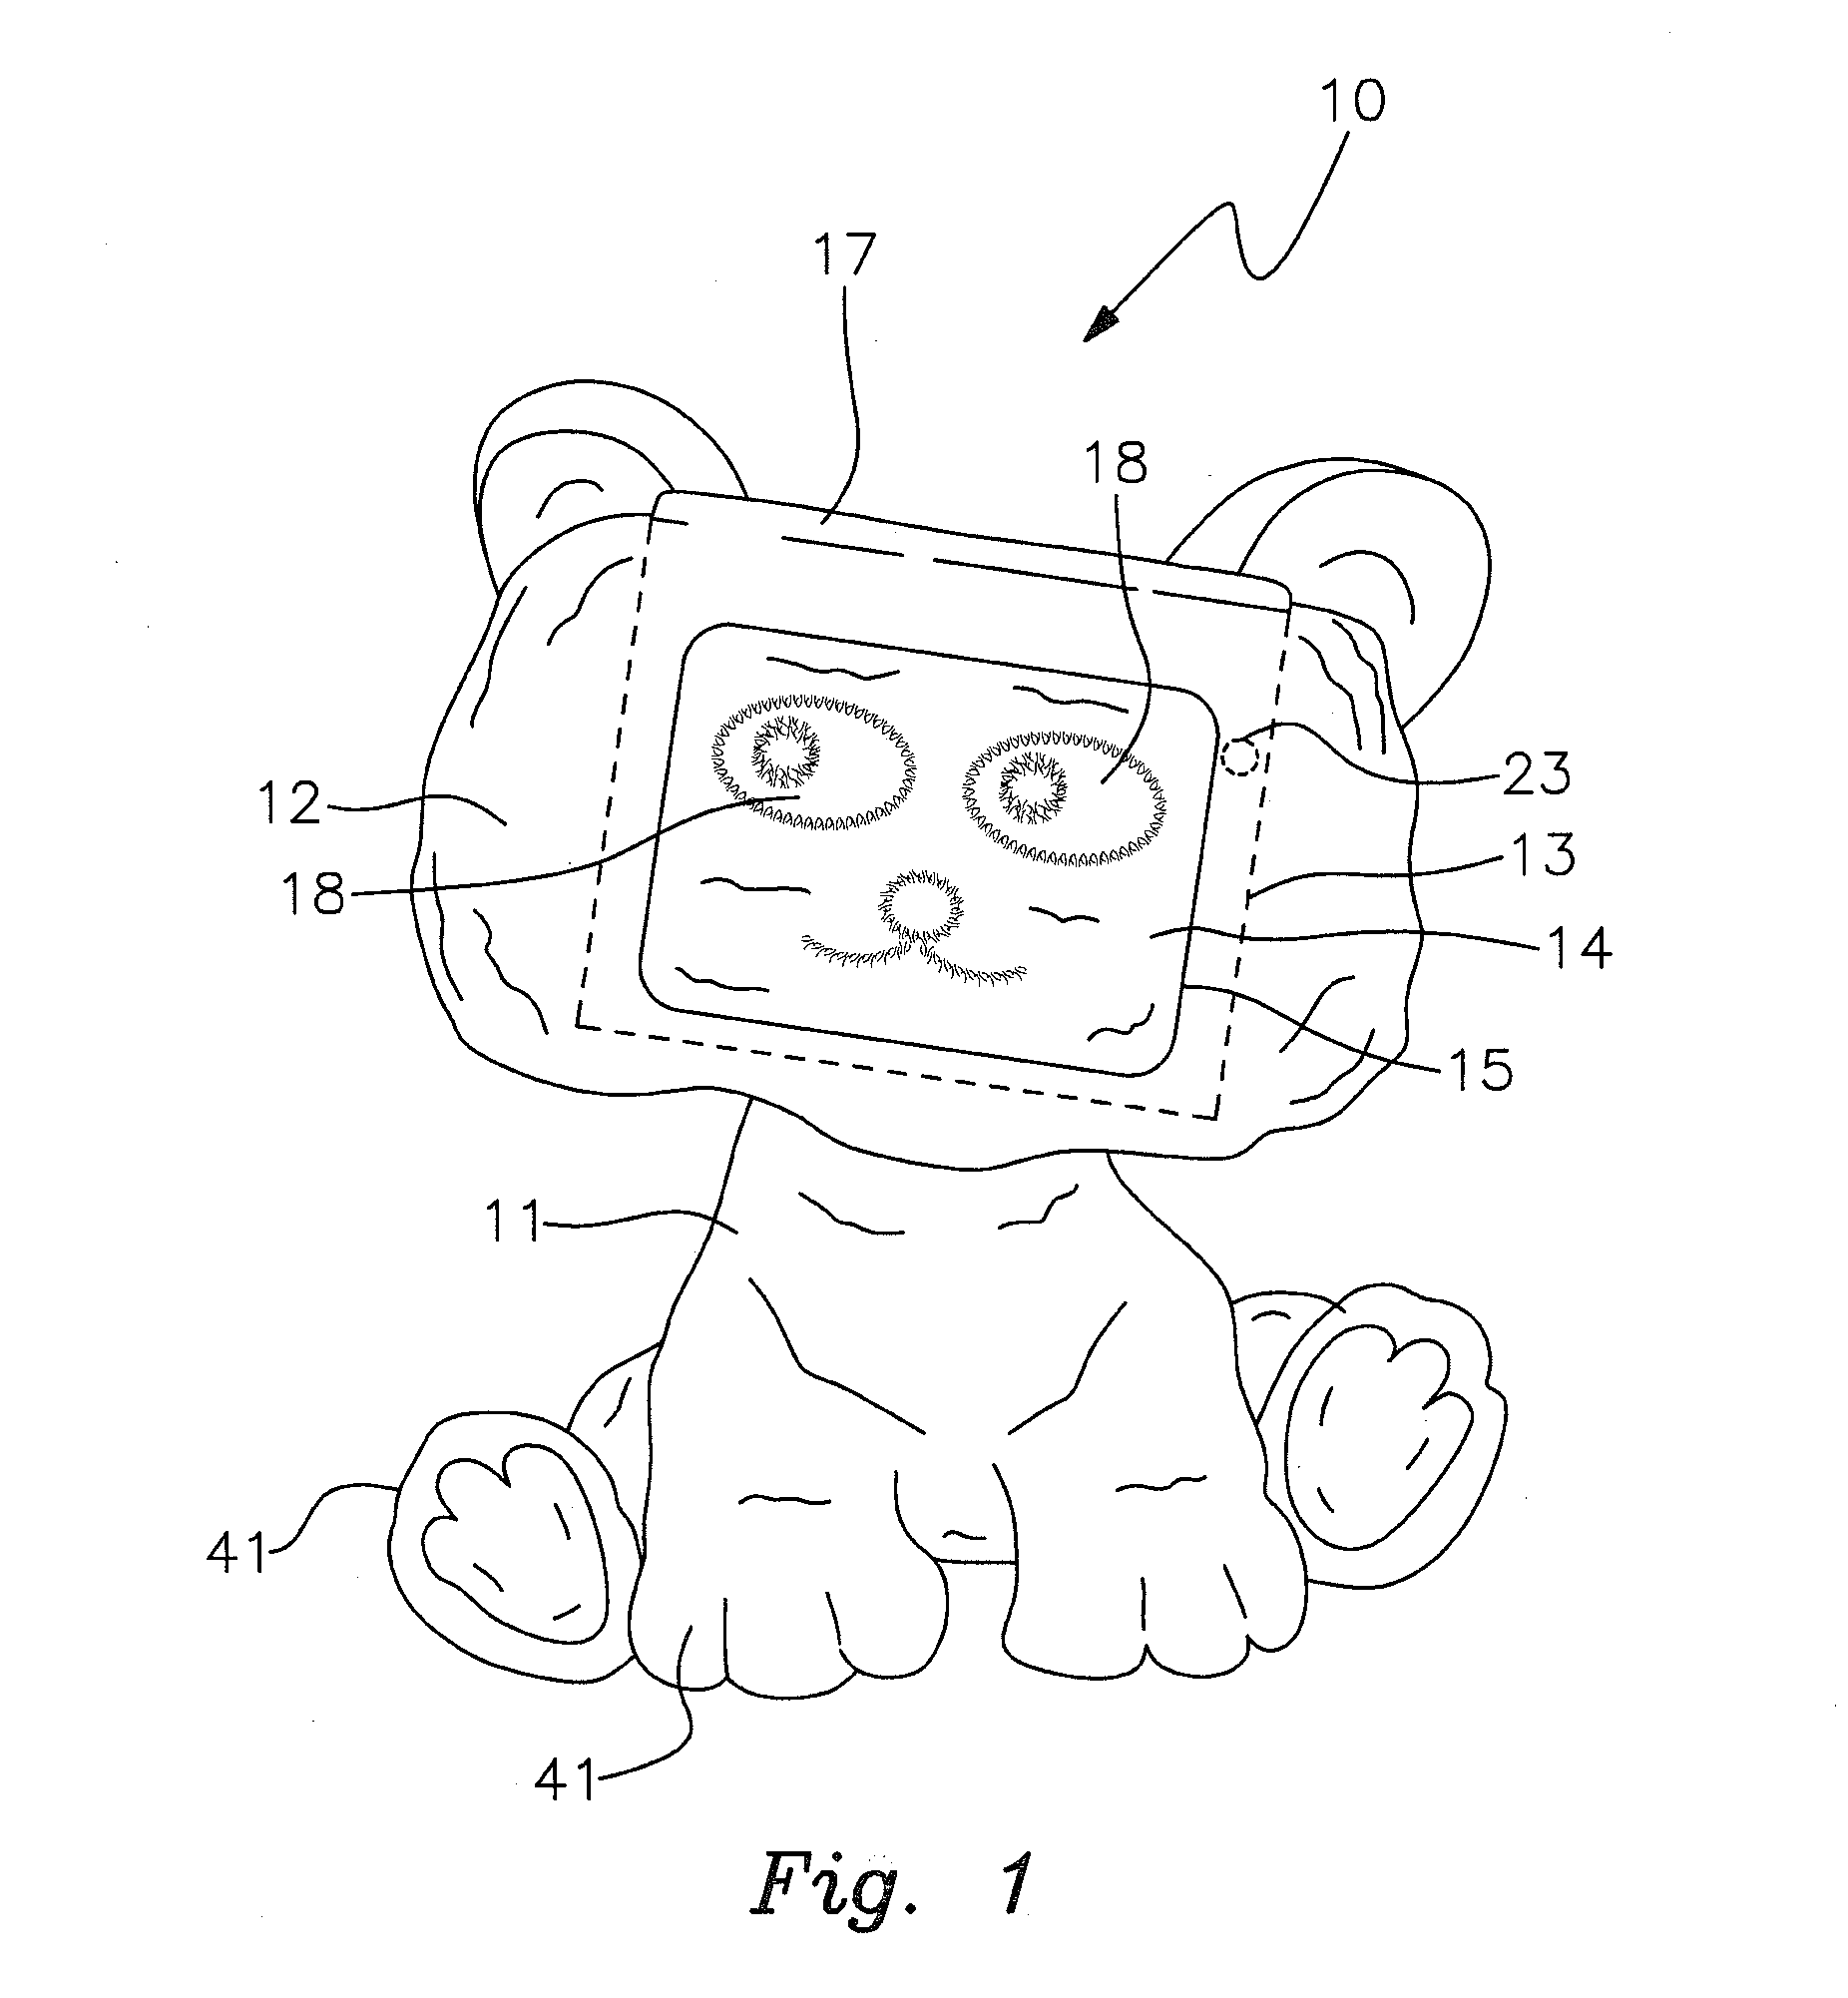 Figurine toy in combination with a portable, removable wireless computer device having a visual display screen